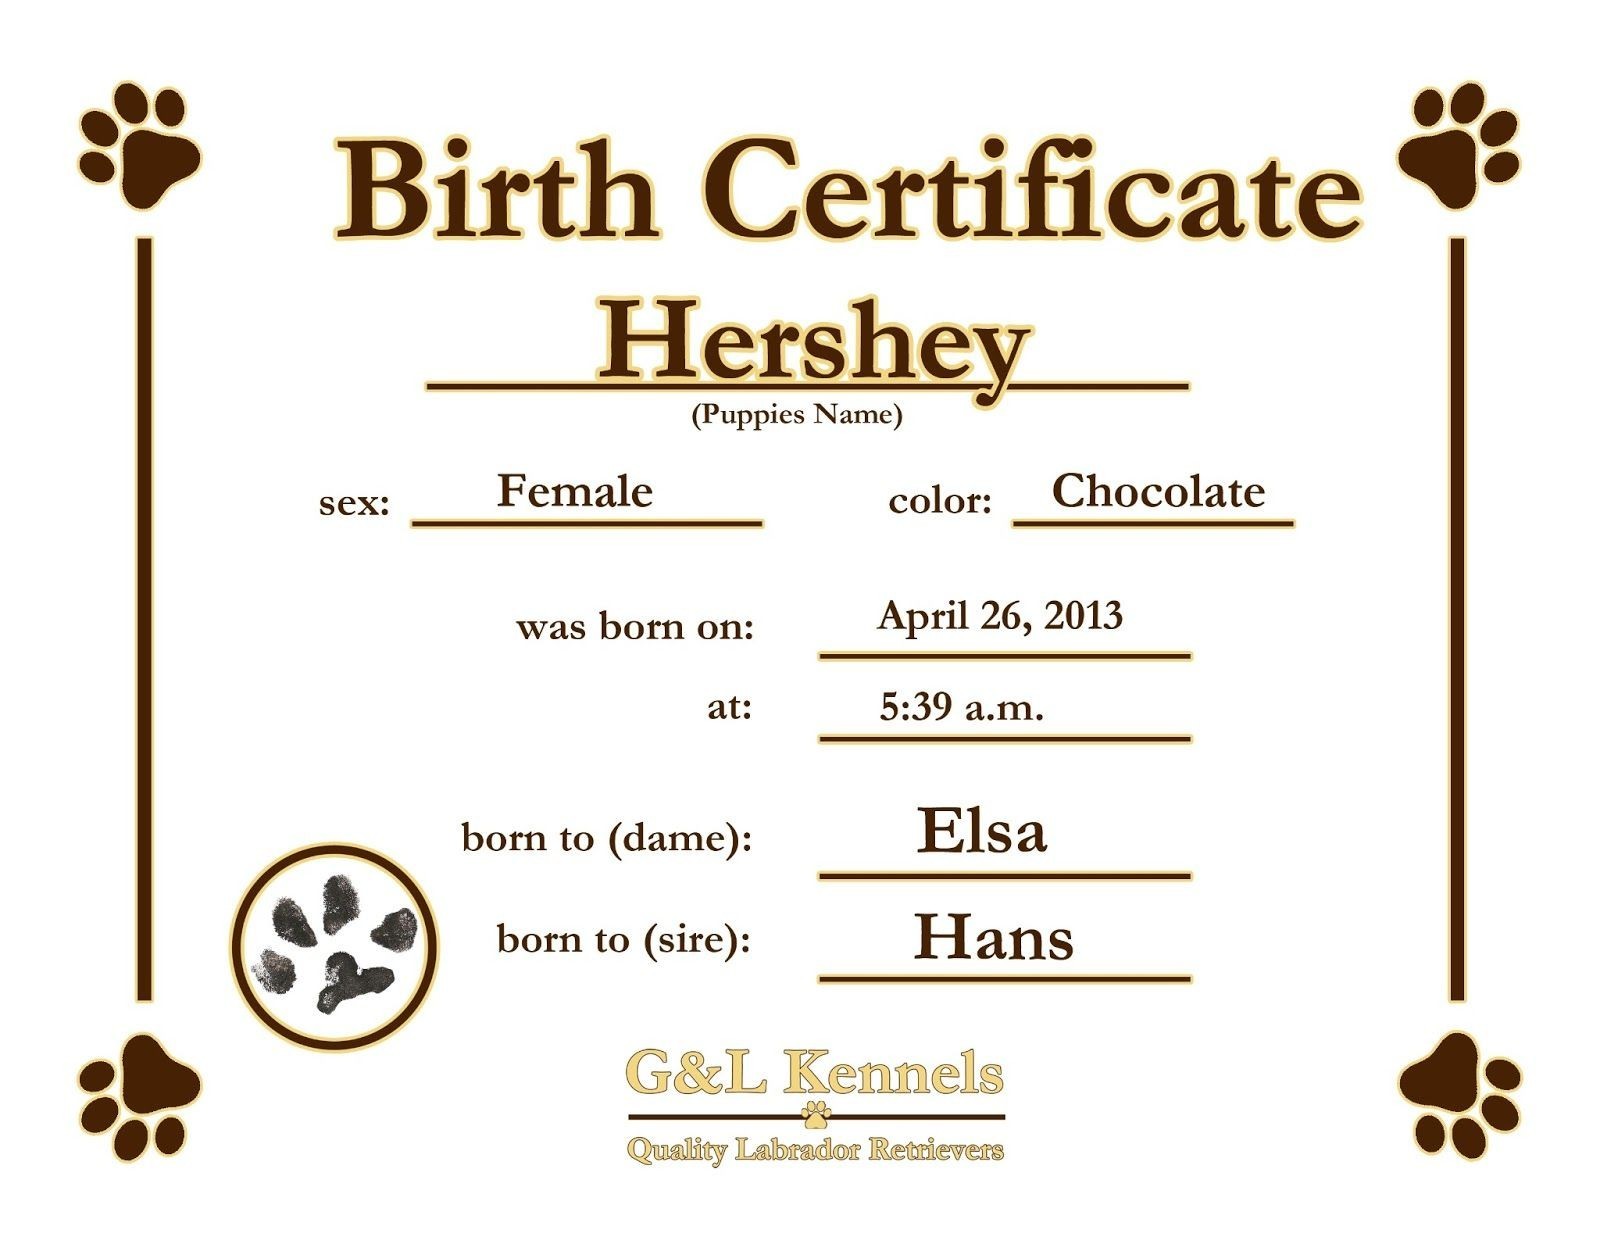 Official Birth Certificate Template Sample Blank